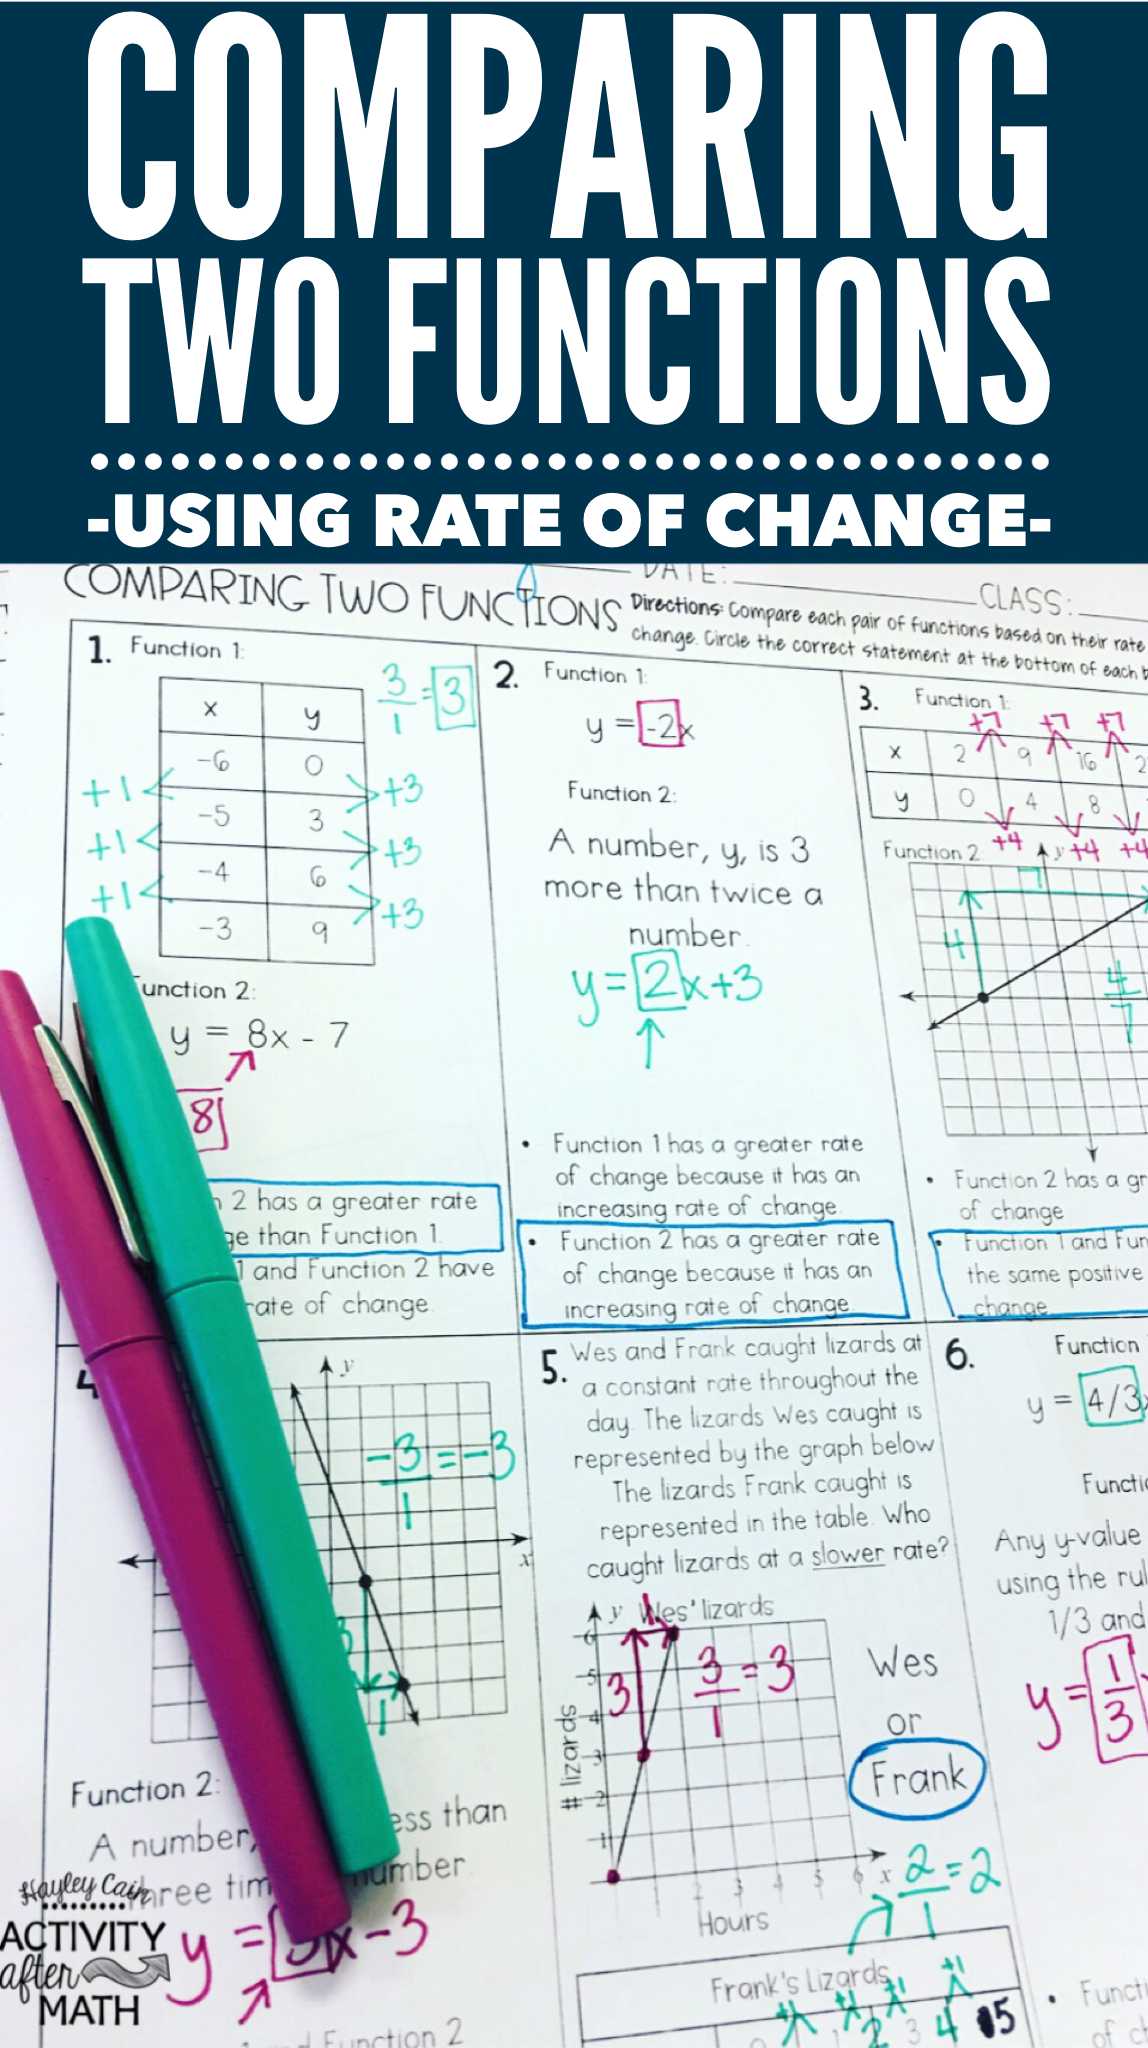 Radicals and Rational Exponents Worksheet Answers together with Paring Two Functions by Rate Of Change Practice Worksheet